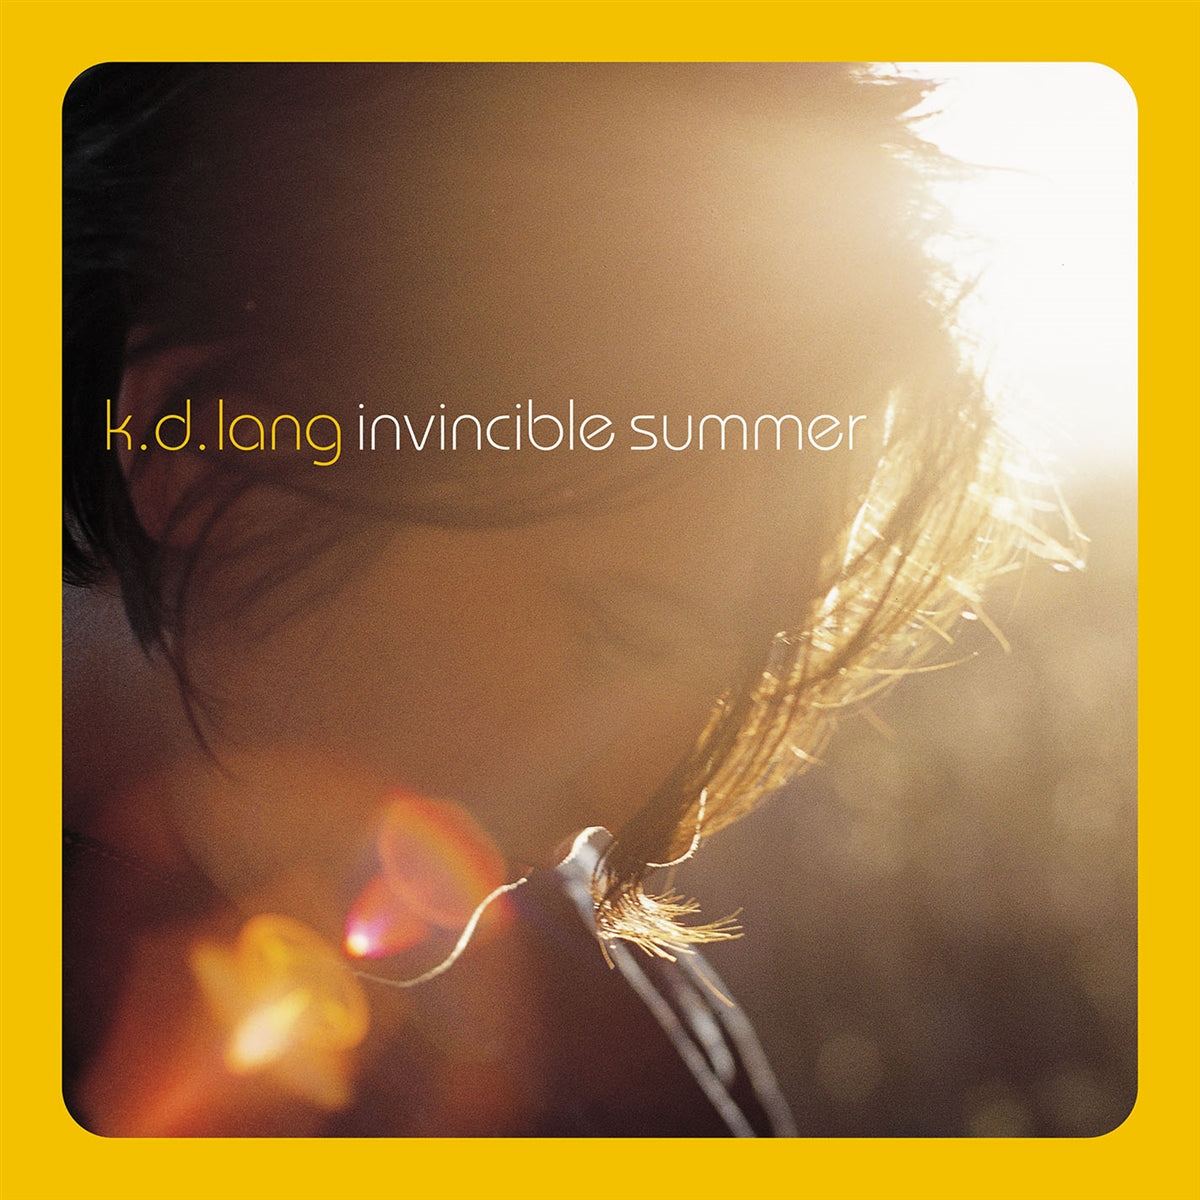 Kd lang | Invincible Summer 20th Anniversary Edition (Yellow Flame colored vinyl; SYEOR Exclusive) | Vinyl